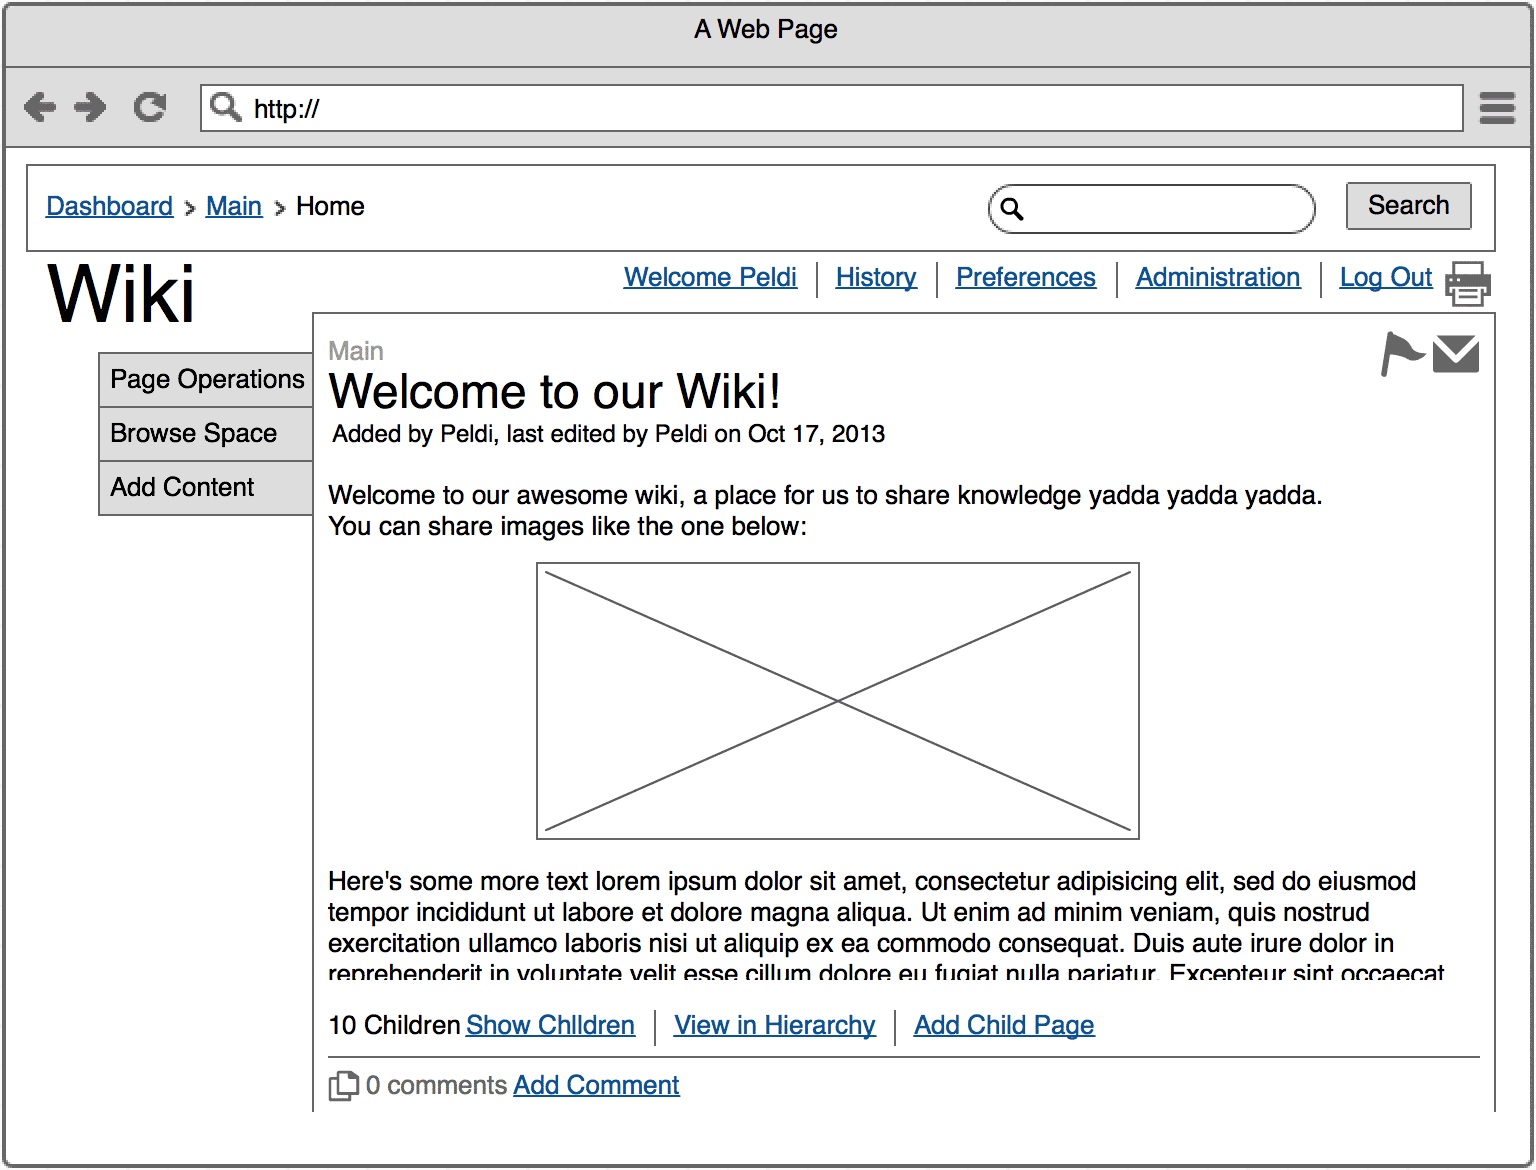 Sourced from <a href='https://support.mybalsamiq.com/projects/examples/grid'>Balsamiq</a>.